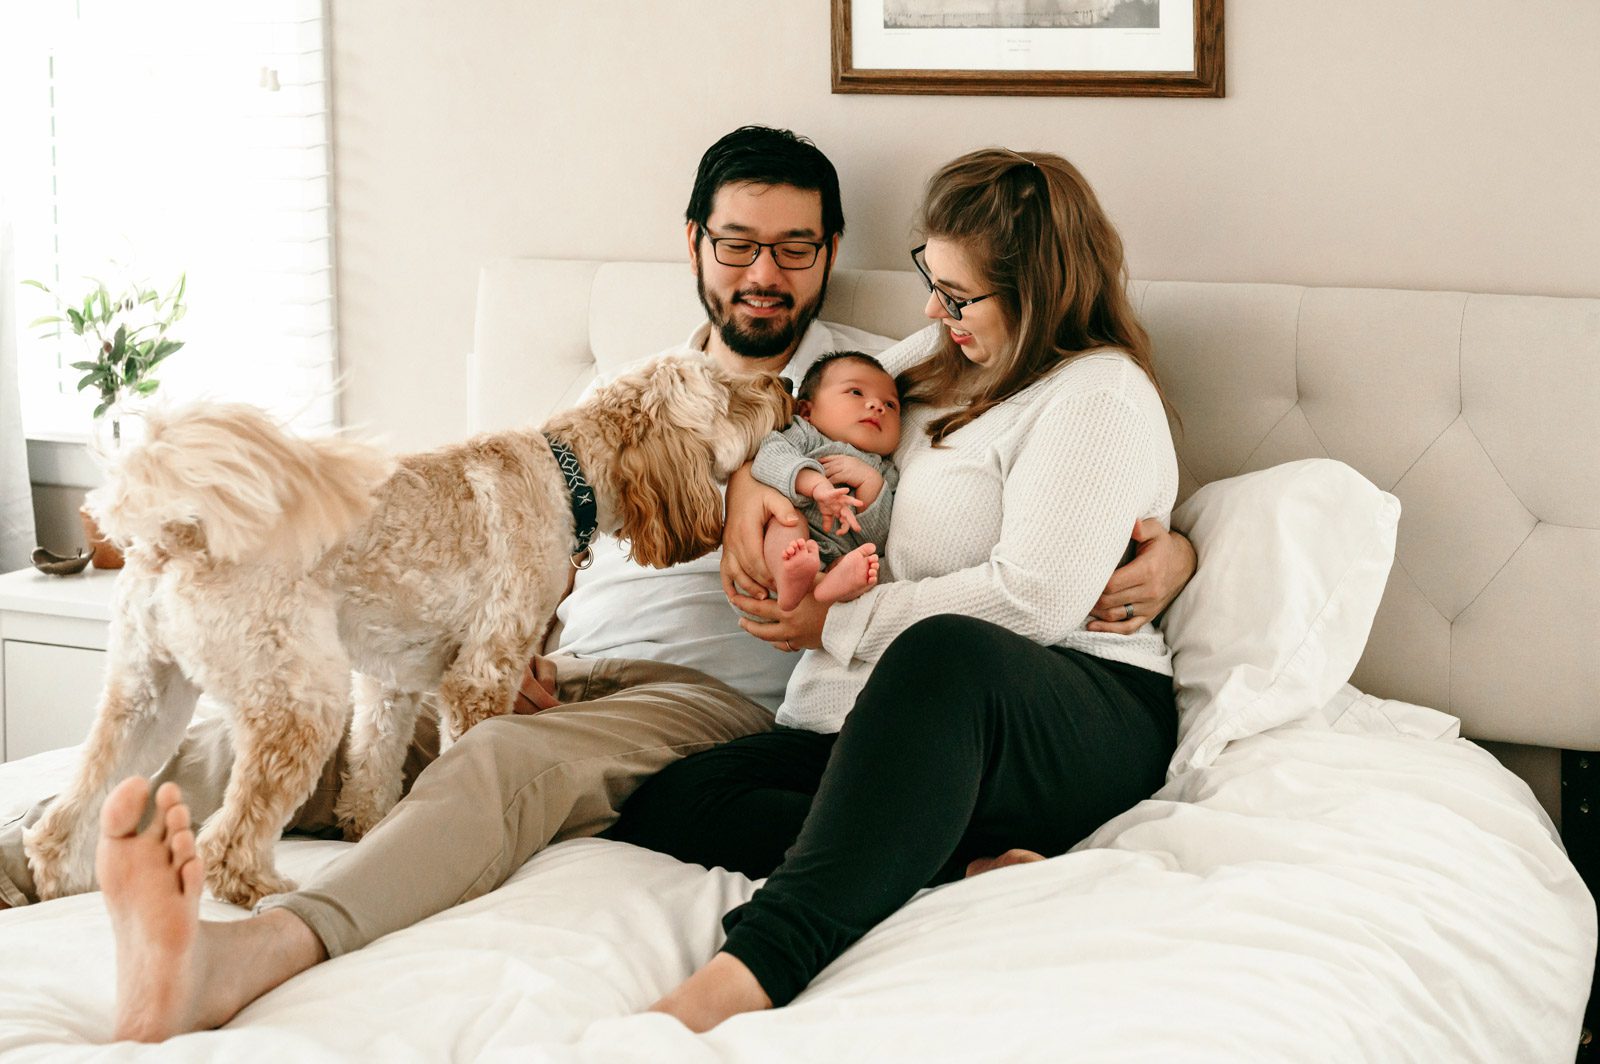 New parents sitting on their bed holding their newborn baby boy and laughing as their pet dog sniffs the baby during a reading home newborn session